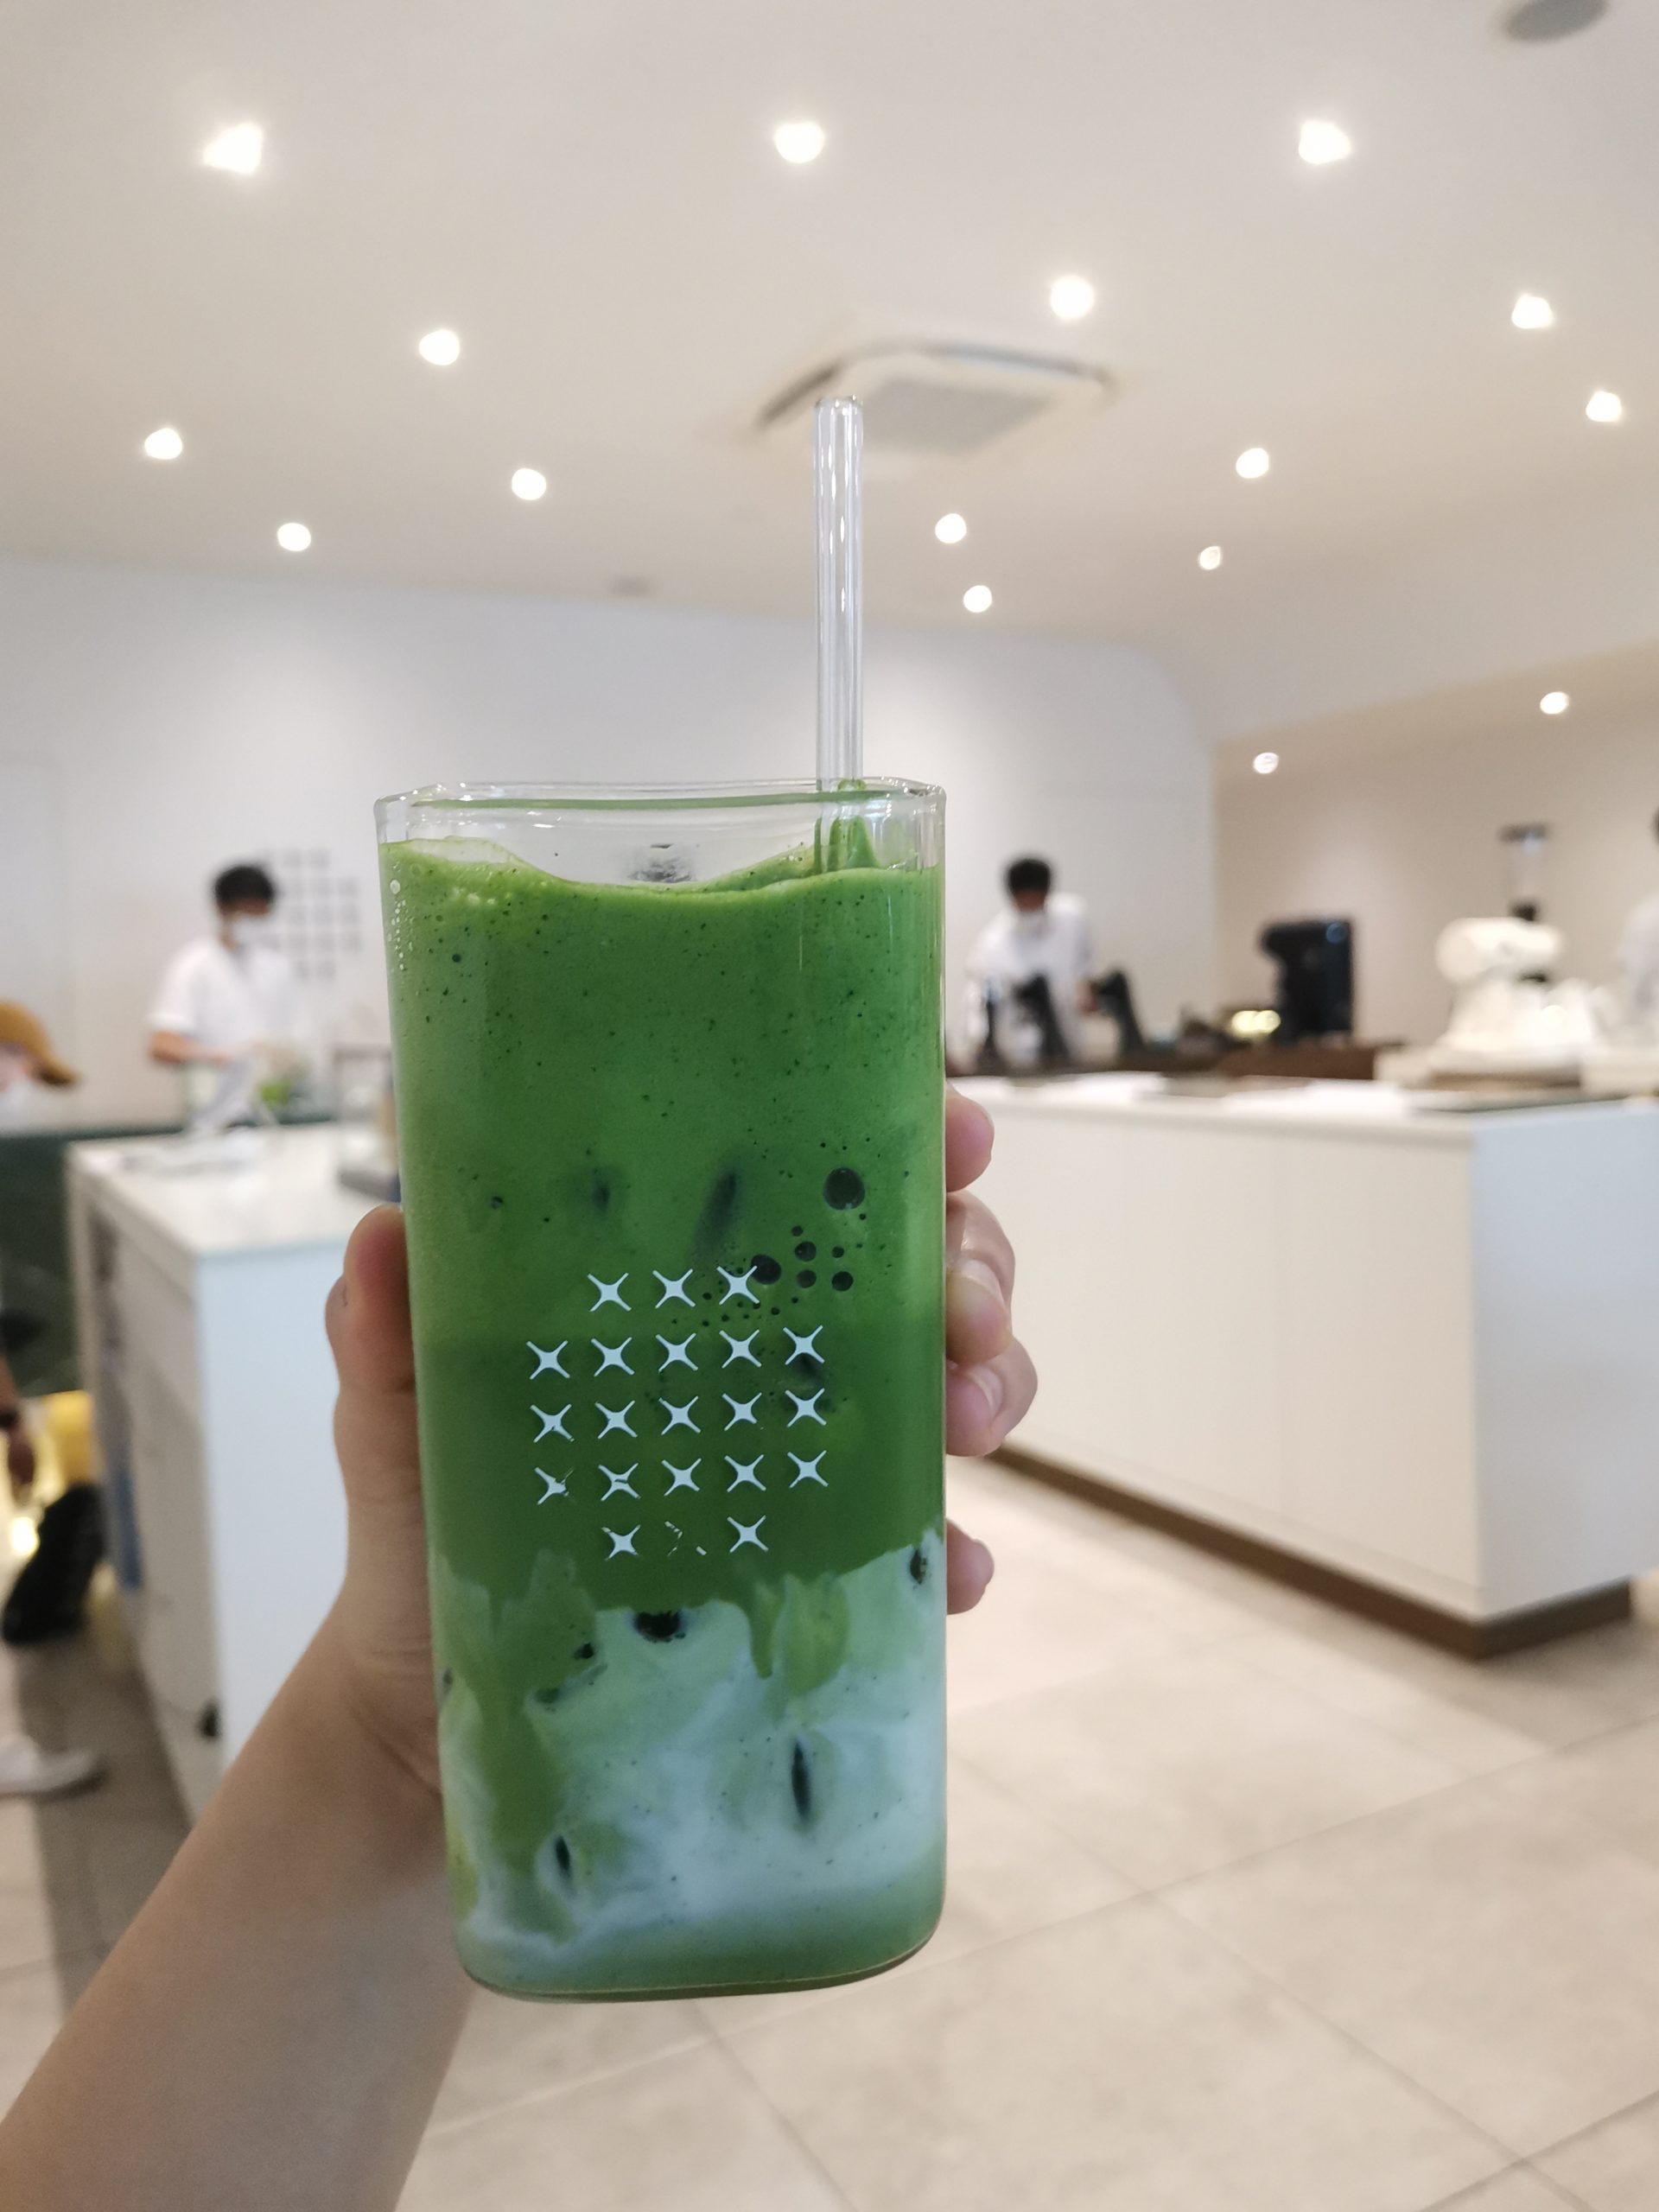 Better together? Taking on ono cafe's unique coffee and matcha combination | weirdkaya